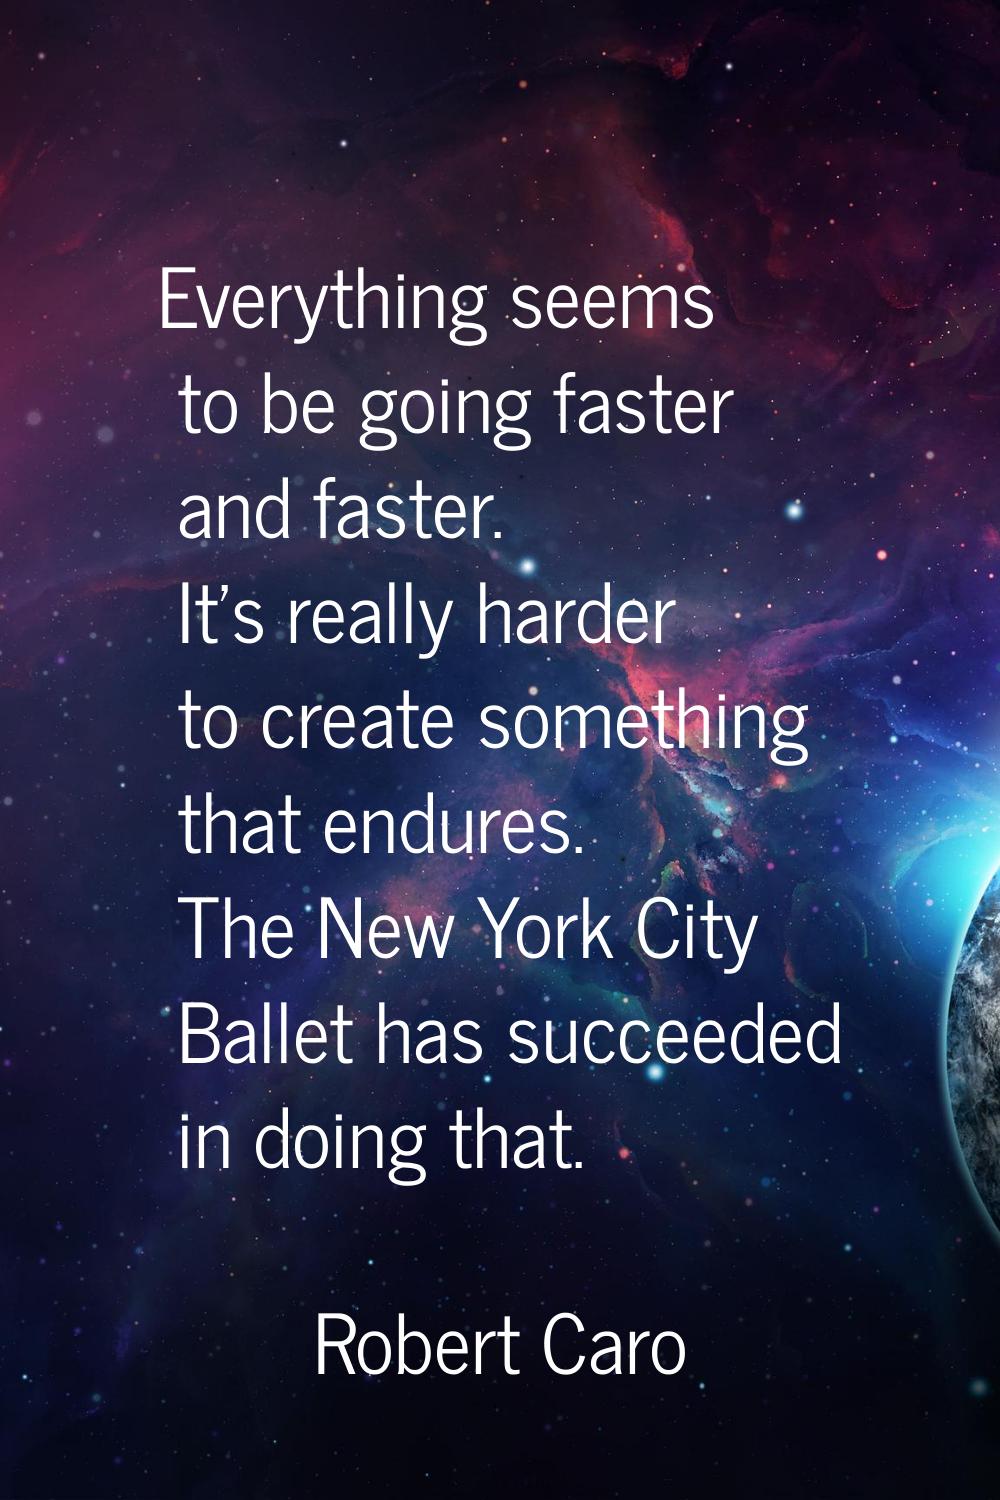 Everything seems to be going faster and faster. It's really harder to create something that endures